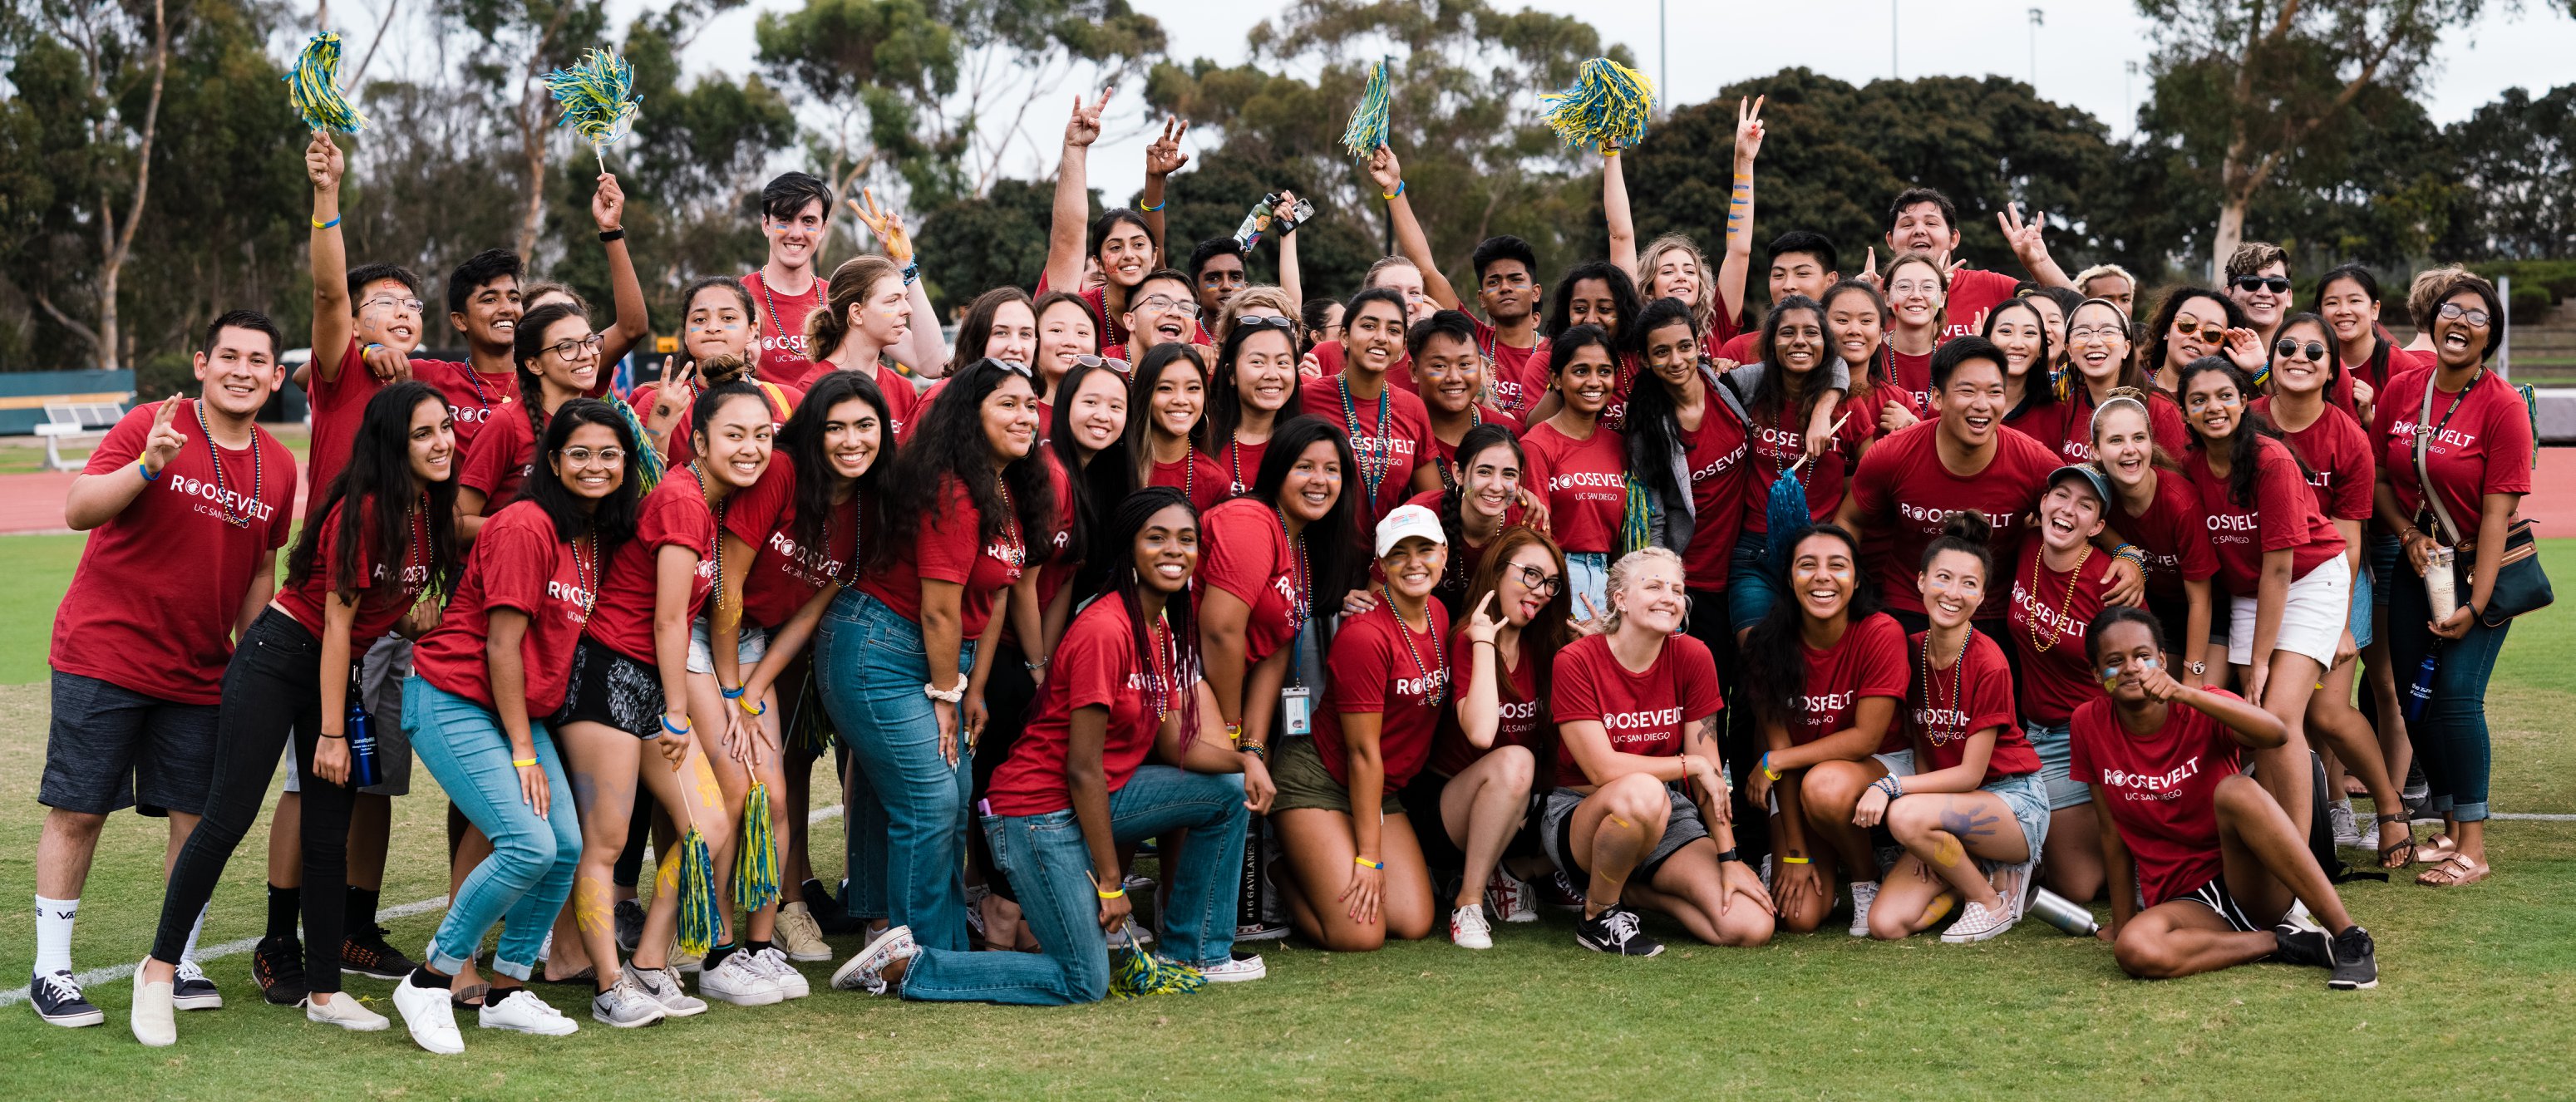 This image depicts approximately 50 students all wearing dark red "Roosevelt" shirts and smiling on a grass field after participating in UnOlympics.